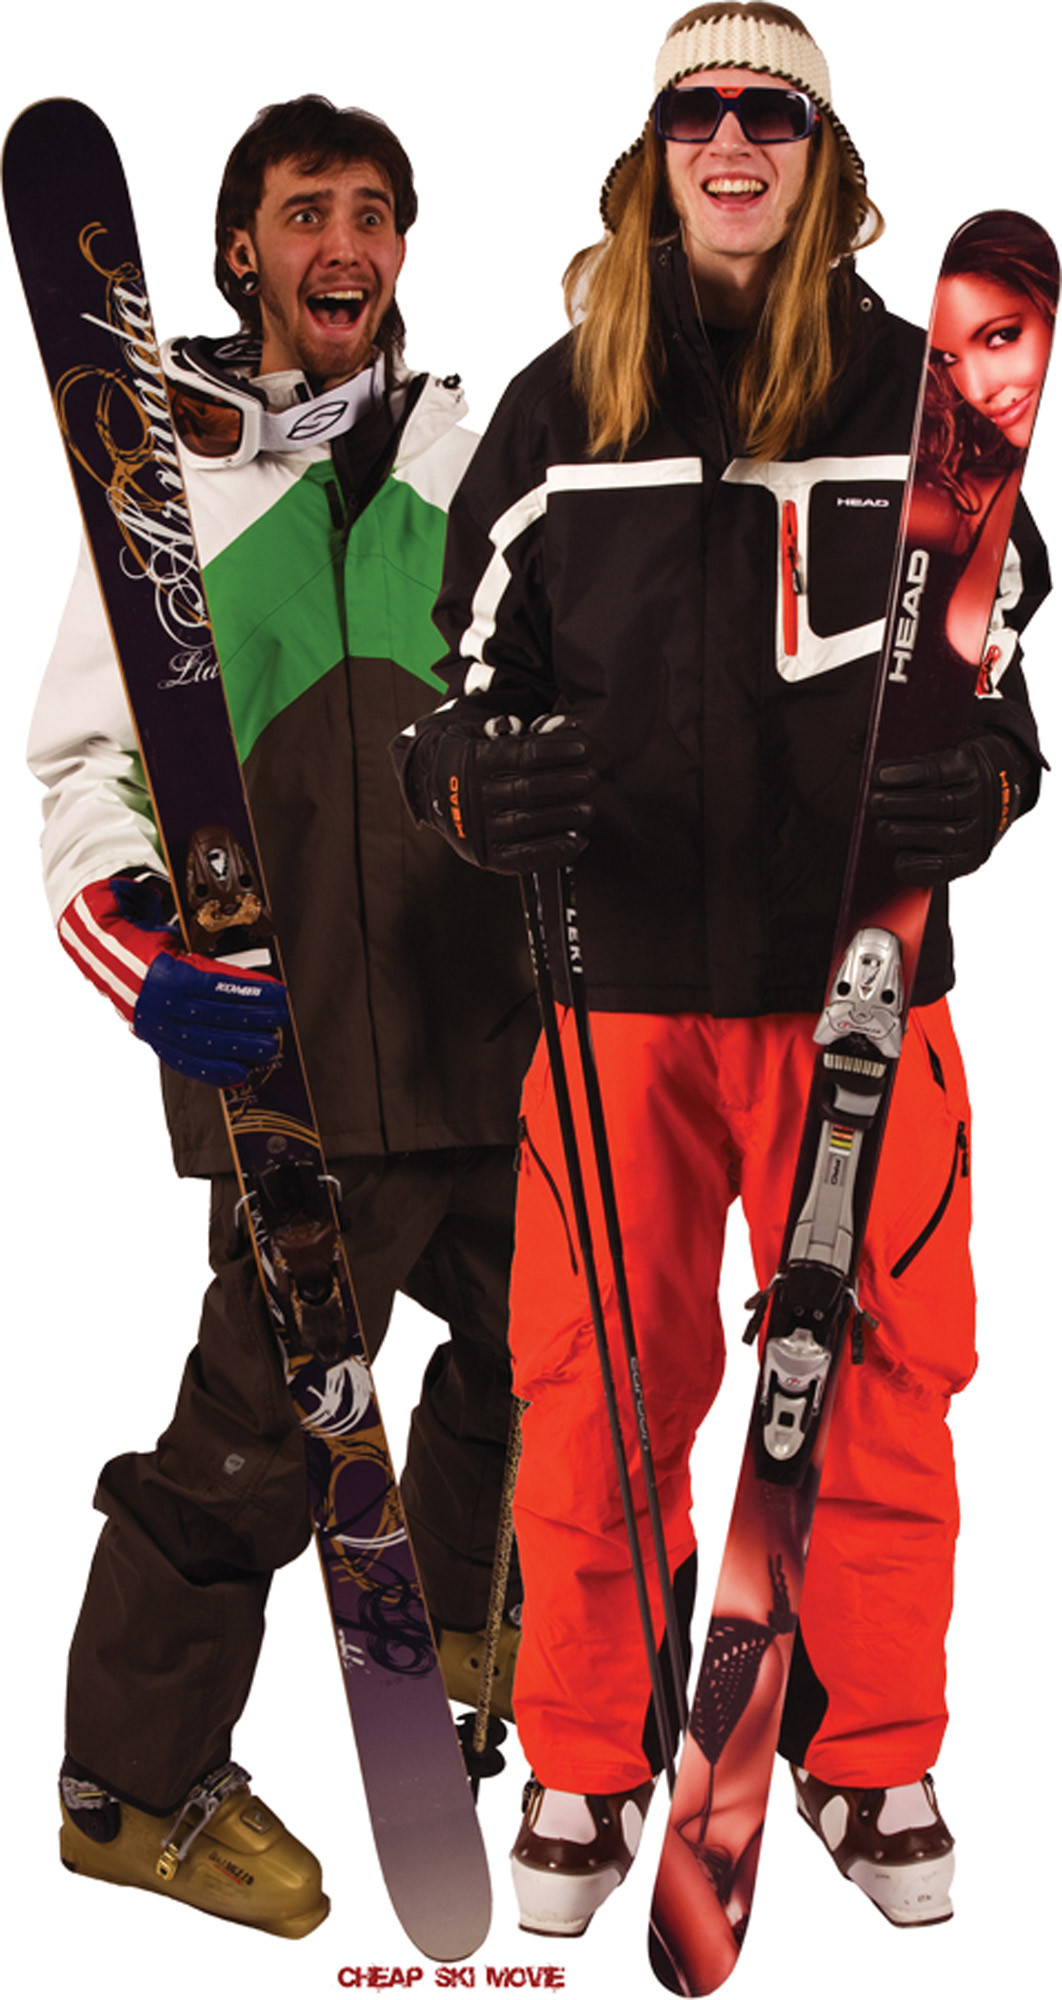 UPC 082033000158 product image for Advanced Graphics Jonny & Lou 2 Cheap Ski Movie Cut-Out Stand Up Poster | upcitemdb.com